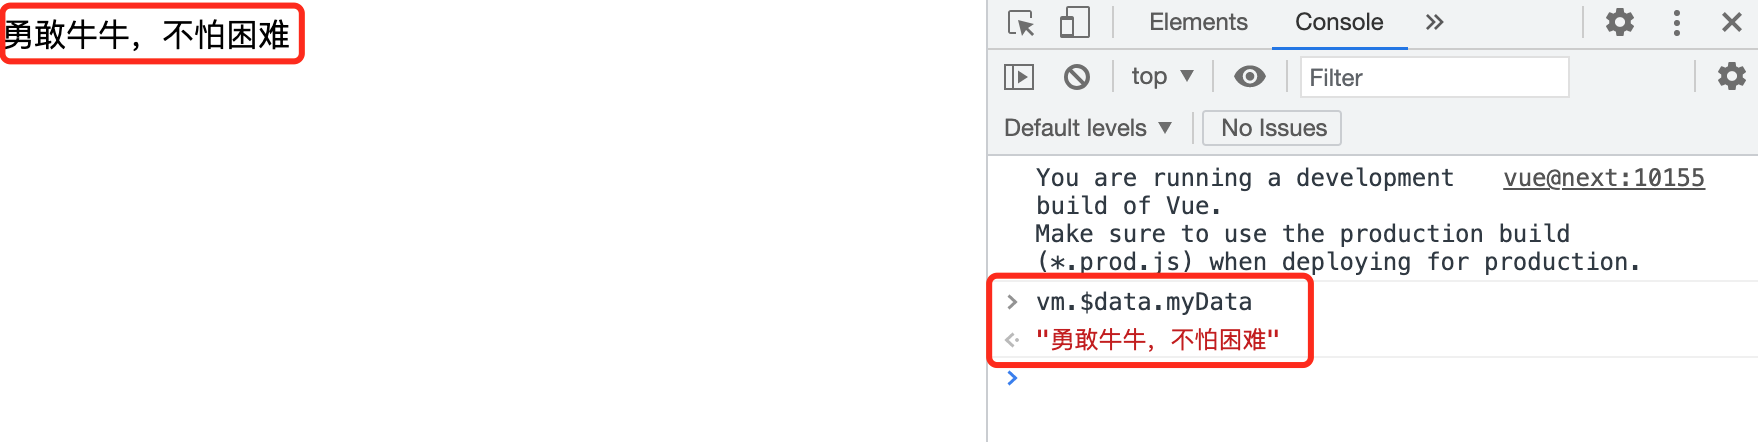 2. Vue基础语法/images/markdown-img-paste-20210628223931456.png